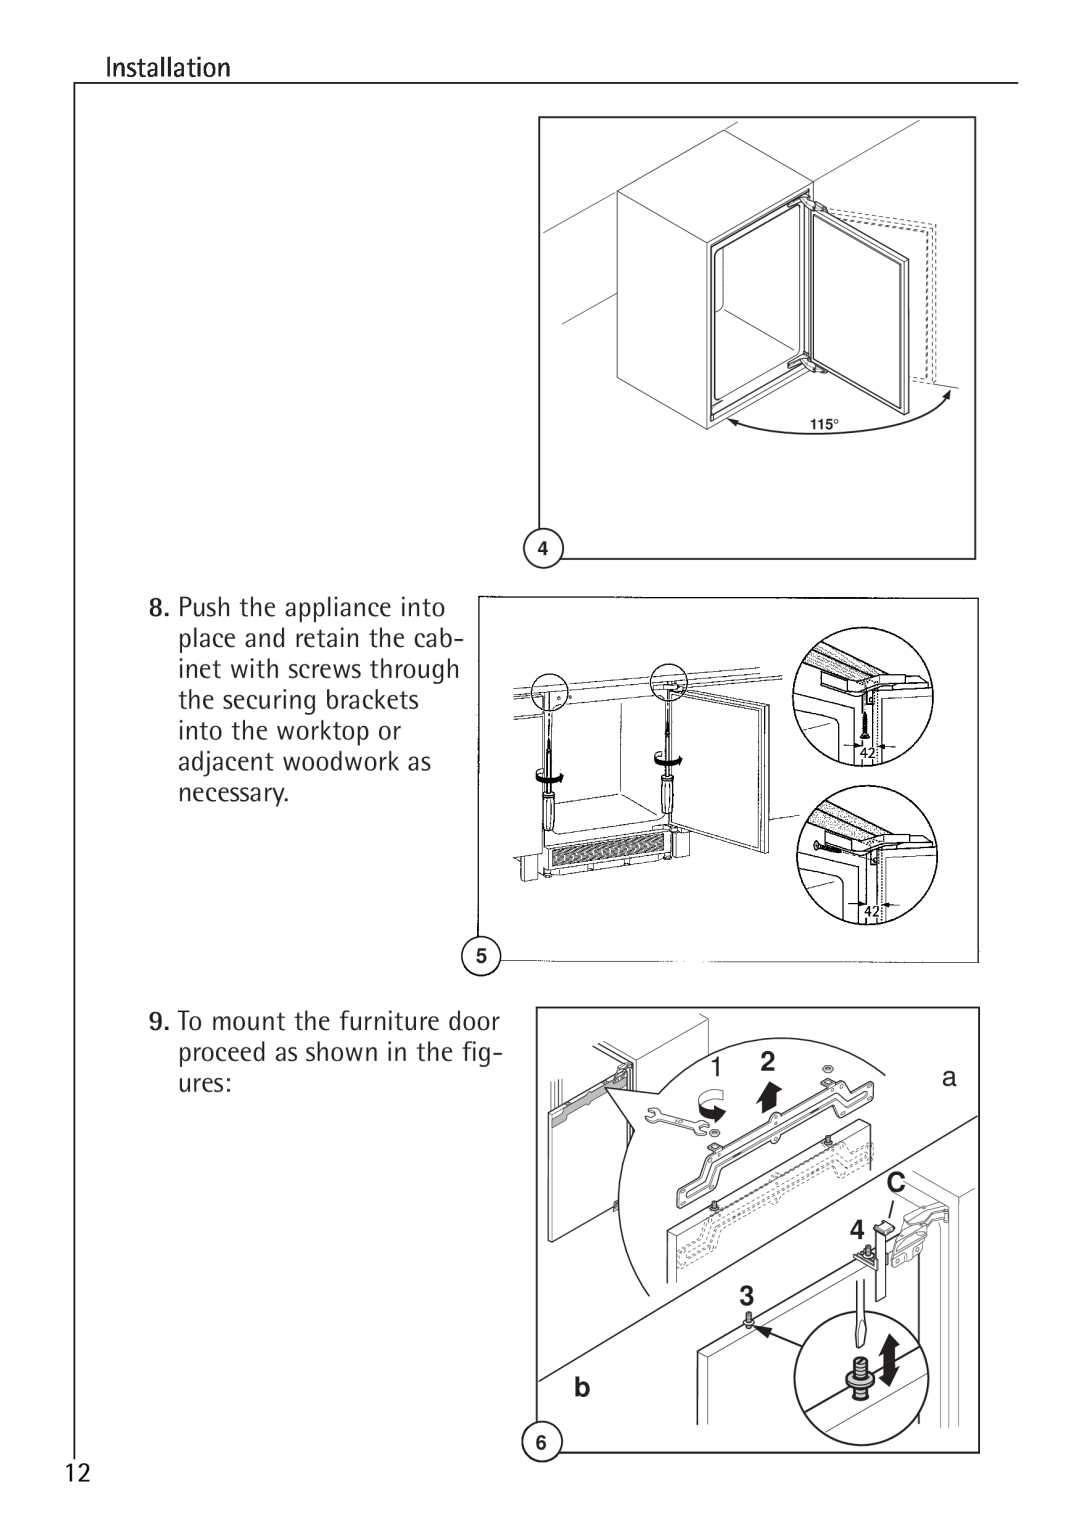 Electrolux SANTO U 86040 i installation instructions To mount the furniture door, ures, proceed as shown in the fig 